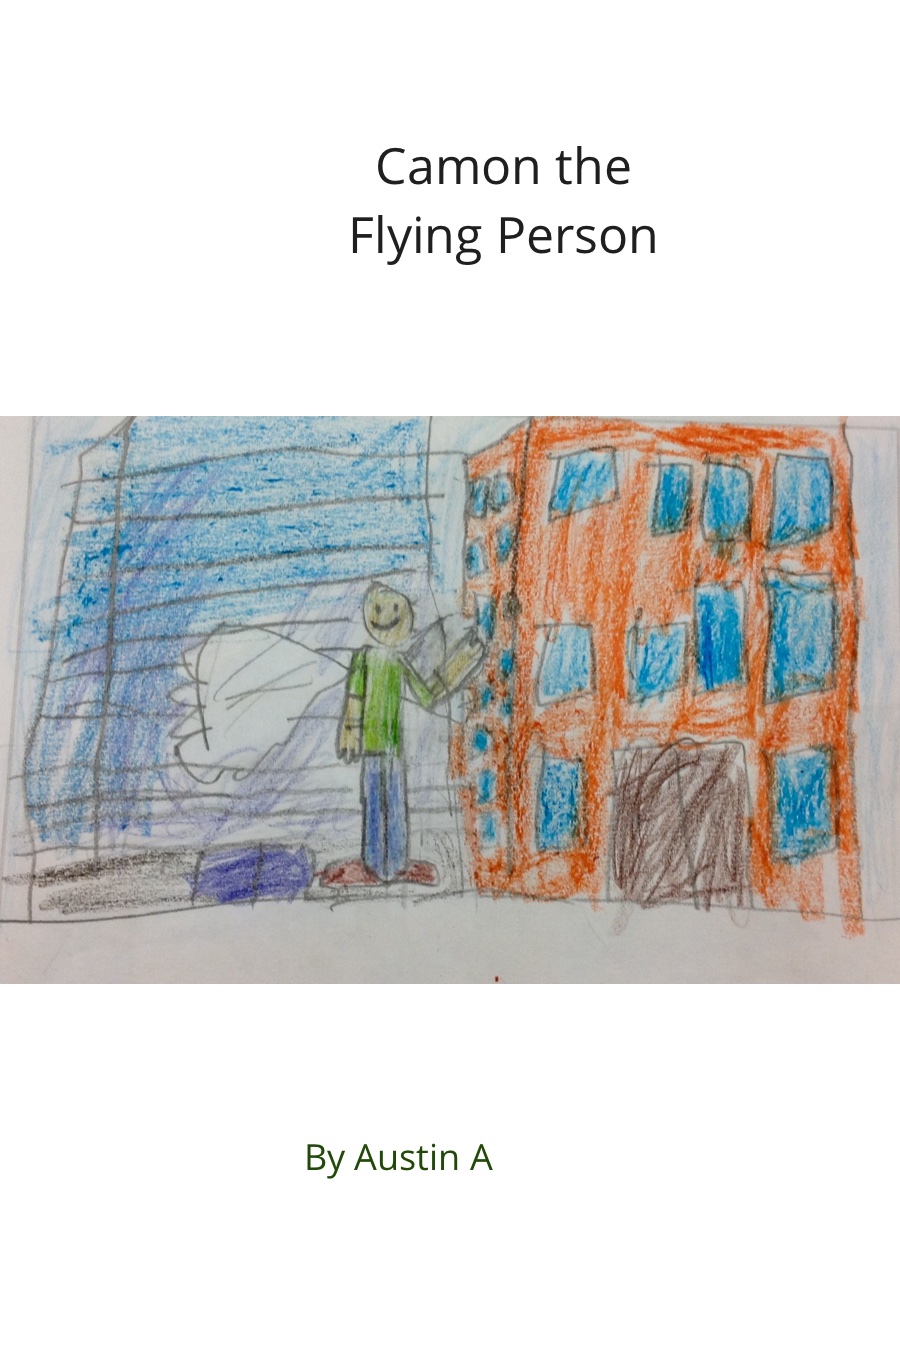 Camon the Flying Person by Austin A